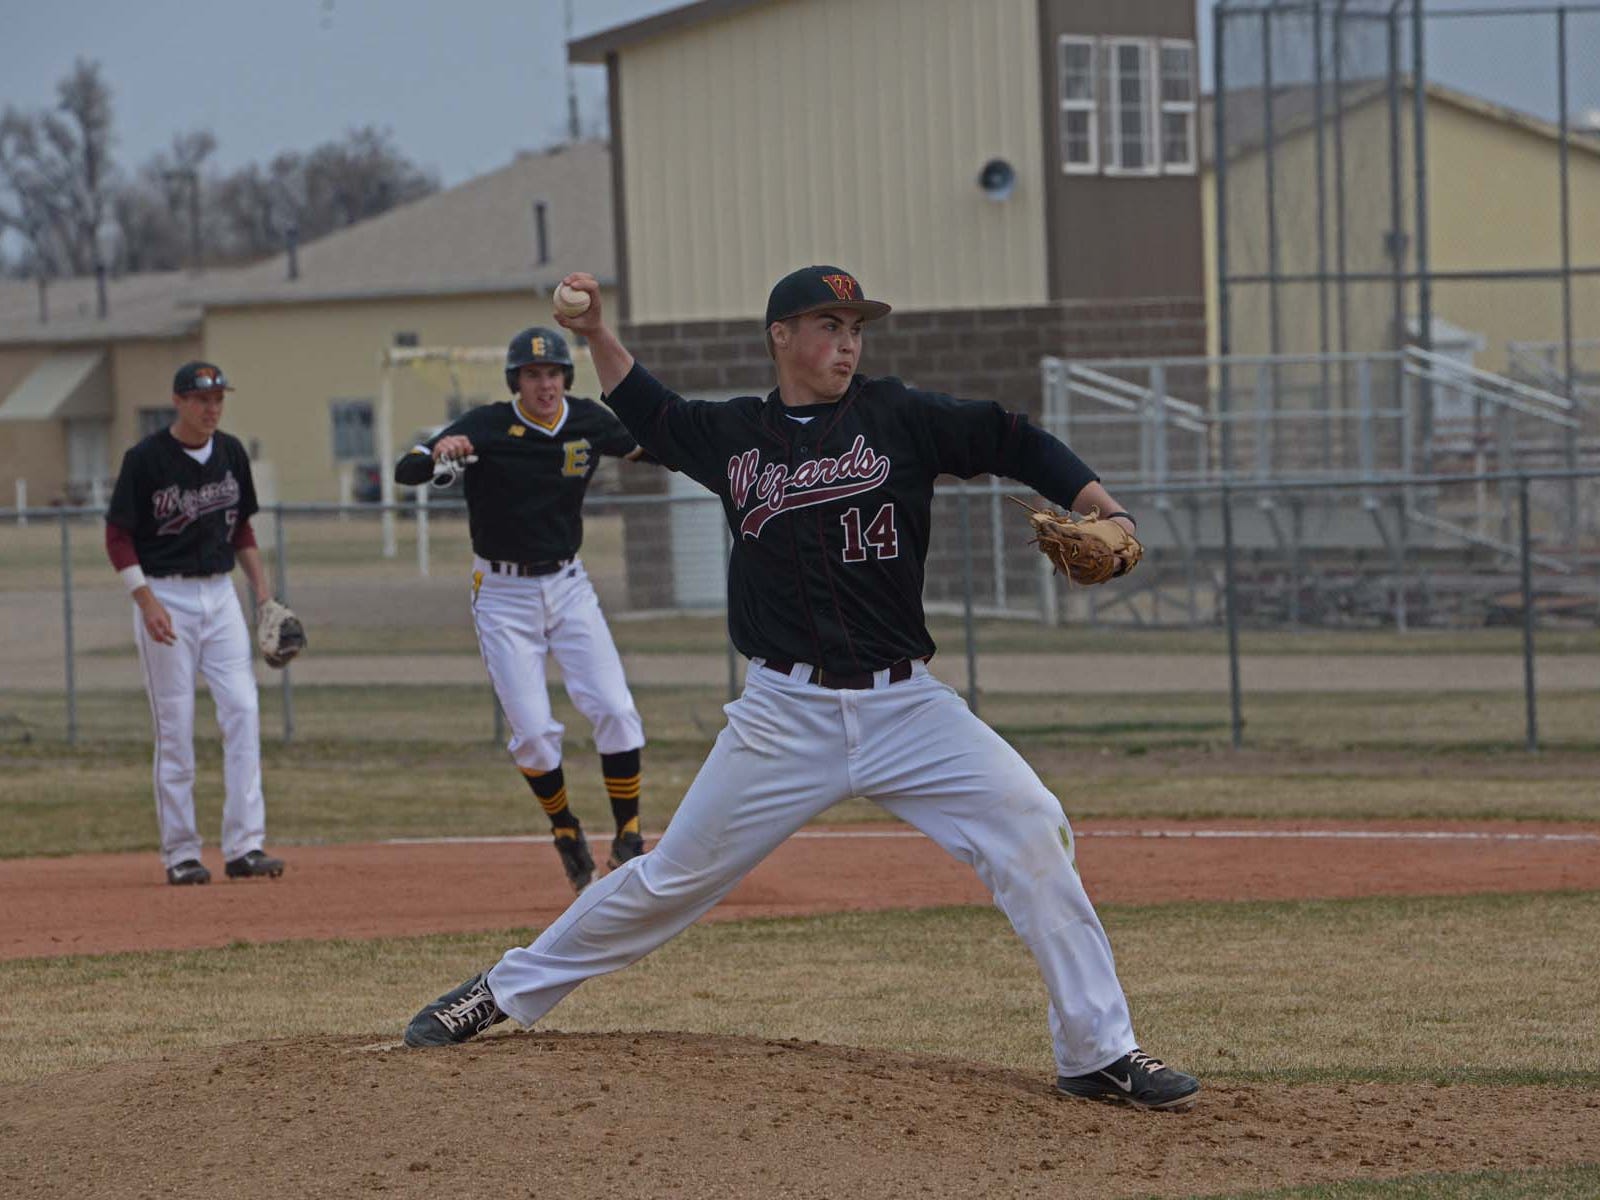 Windsor’s Corte Tapia, shown in this Coloradoan file photo, pitched five scoreless innings to beat Berthoud on Monday.